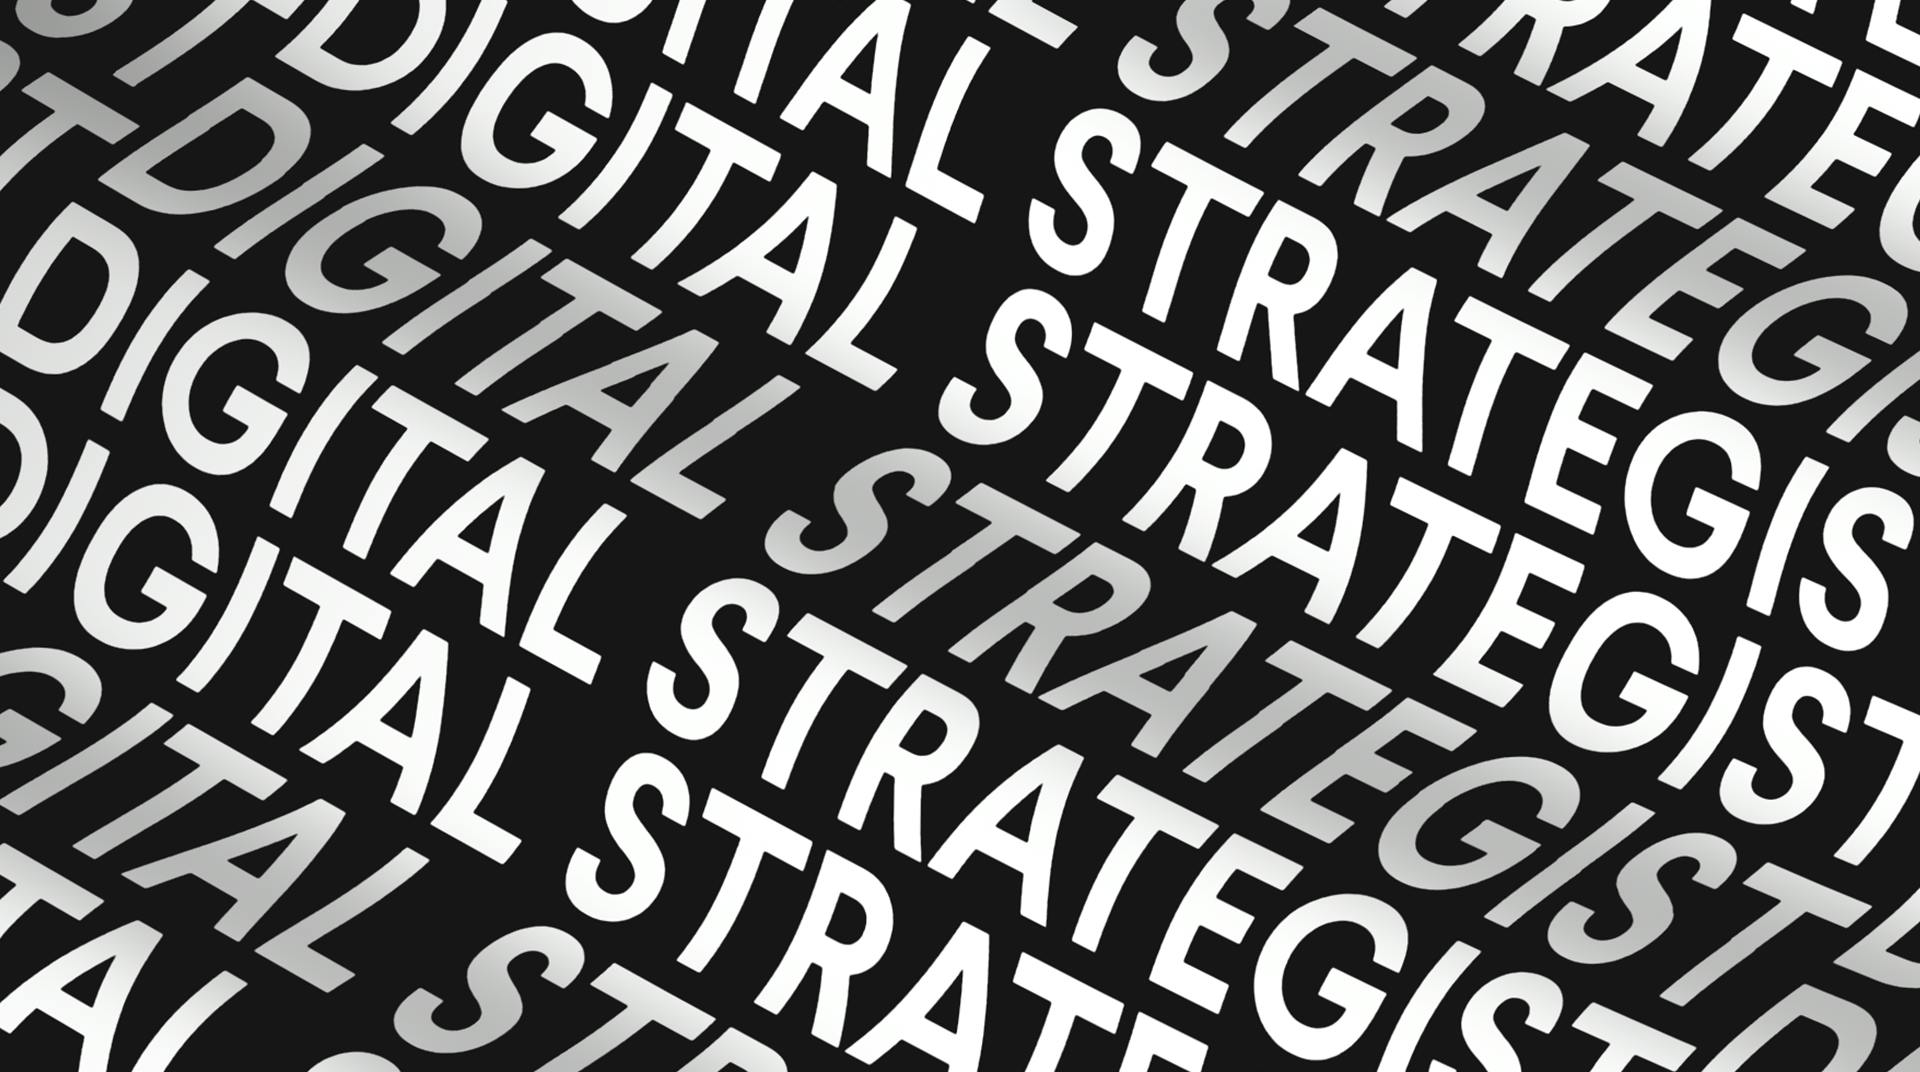 We are looking for an 
experienced Digital Strategist